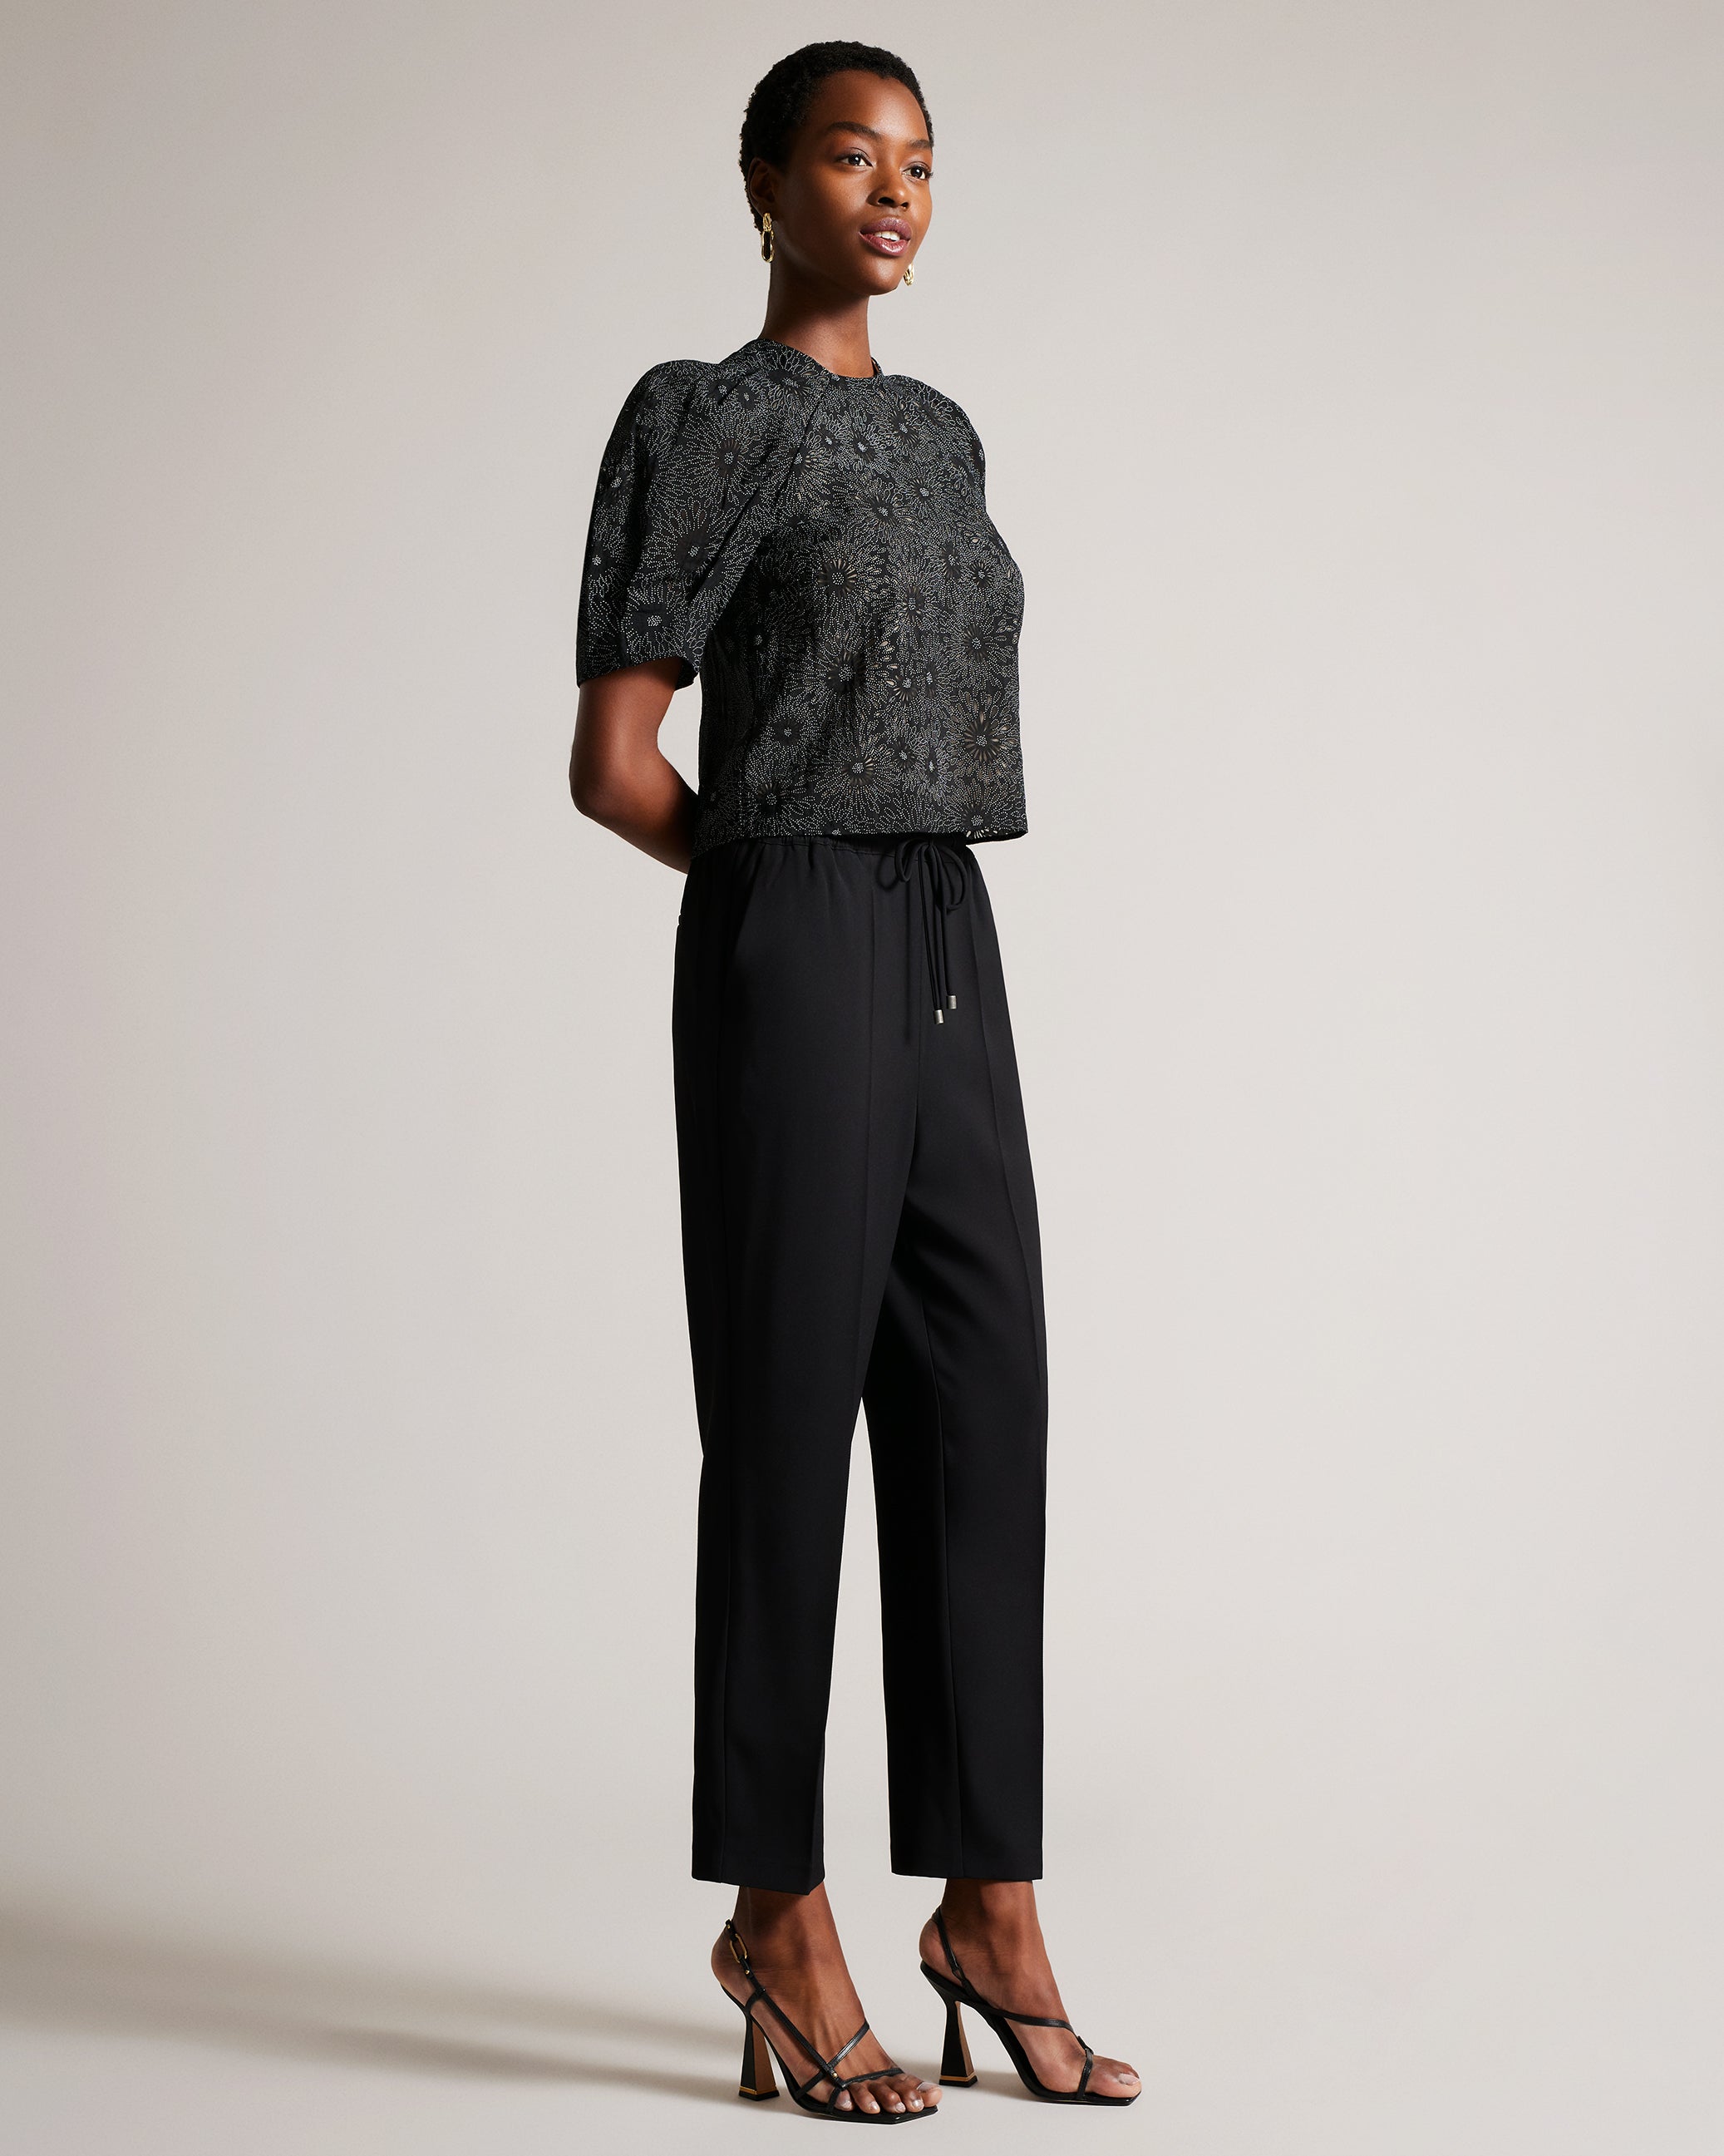 Women's Pants & Shorts – Ted Baker, Canada